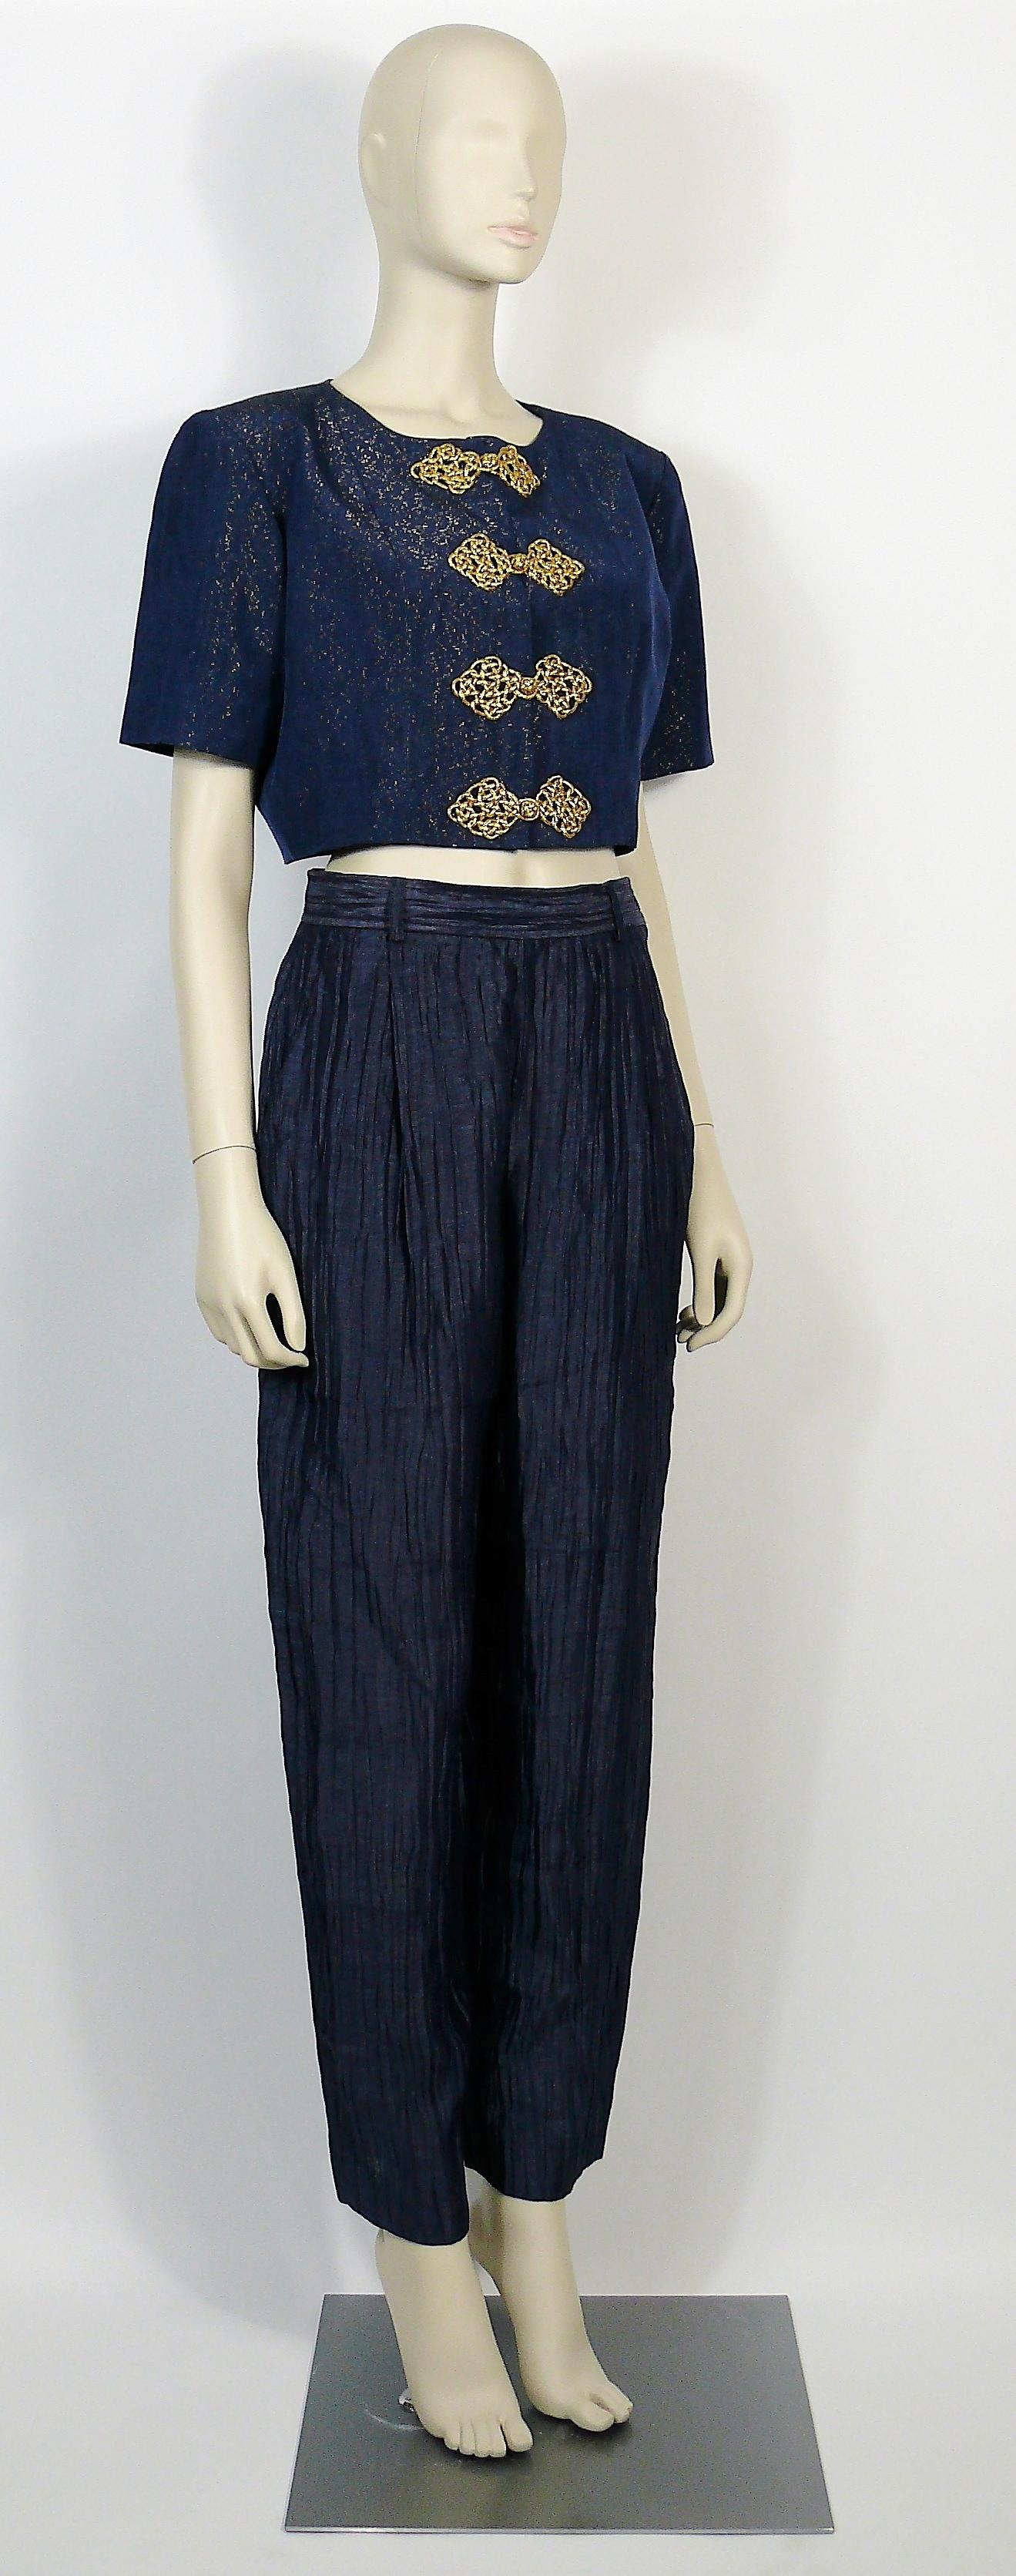 YVES SAINT LAURENT YSL vintage rare and important cropped evening jacket and harem pants suit from the Spring/Summer Ready-to-Wear 1993 Collection.

Similar jacket worn on the runway by NADEGE DUBOSPERTUS.

JACKET features :
- Cropped length.
-